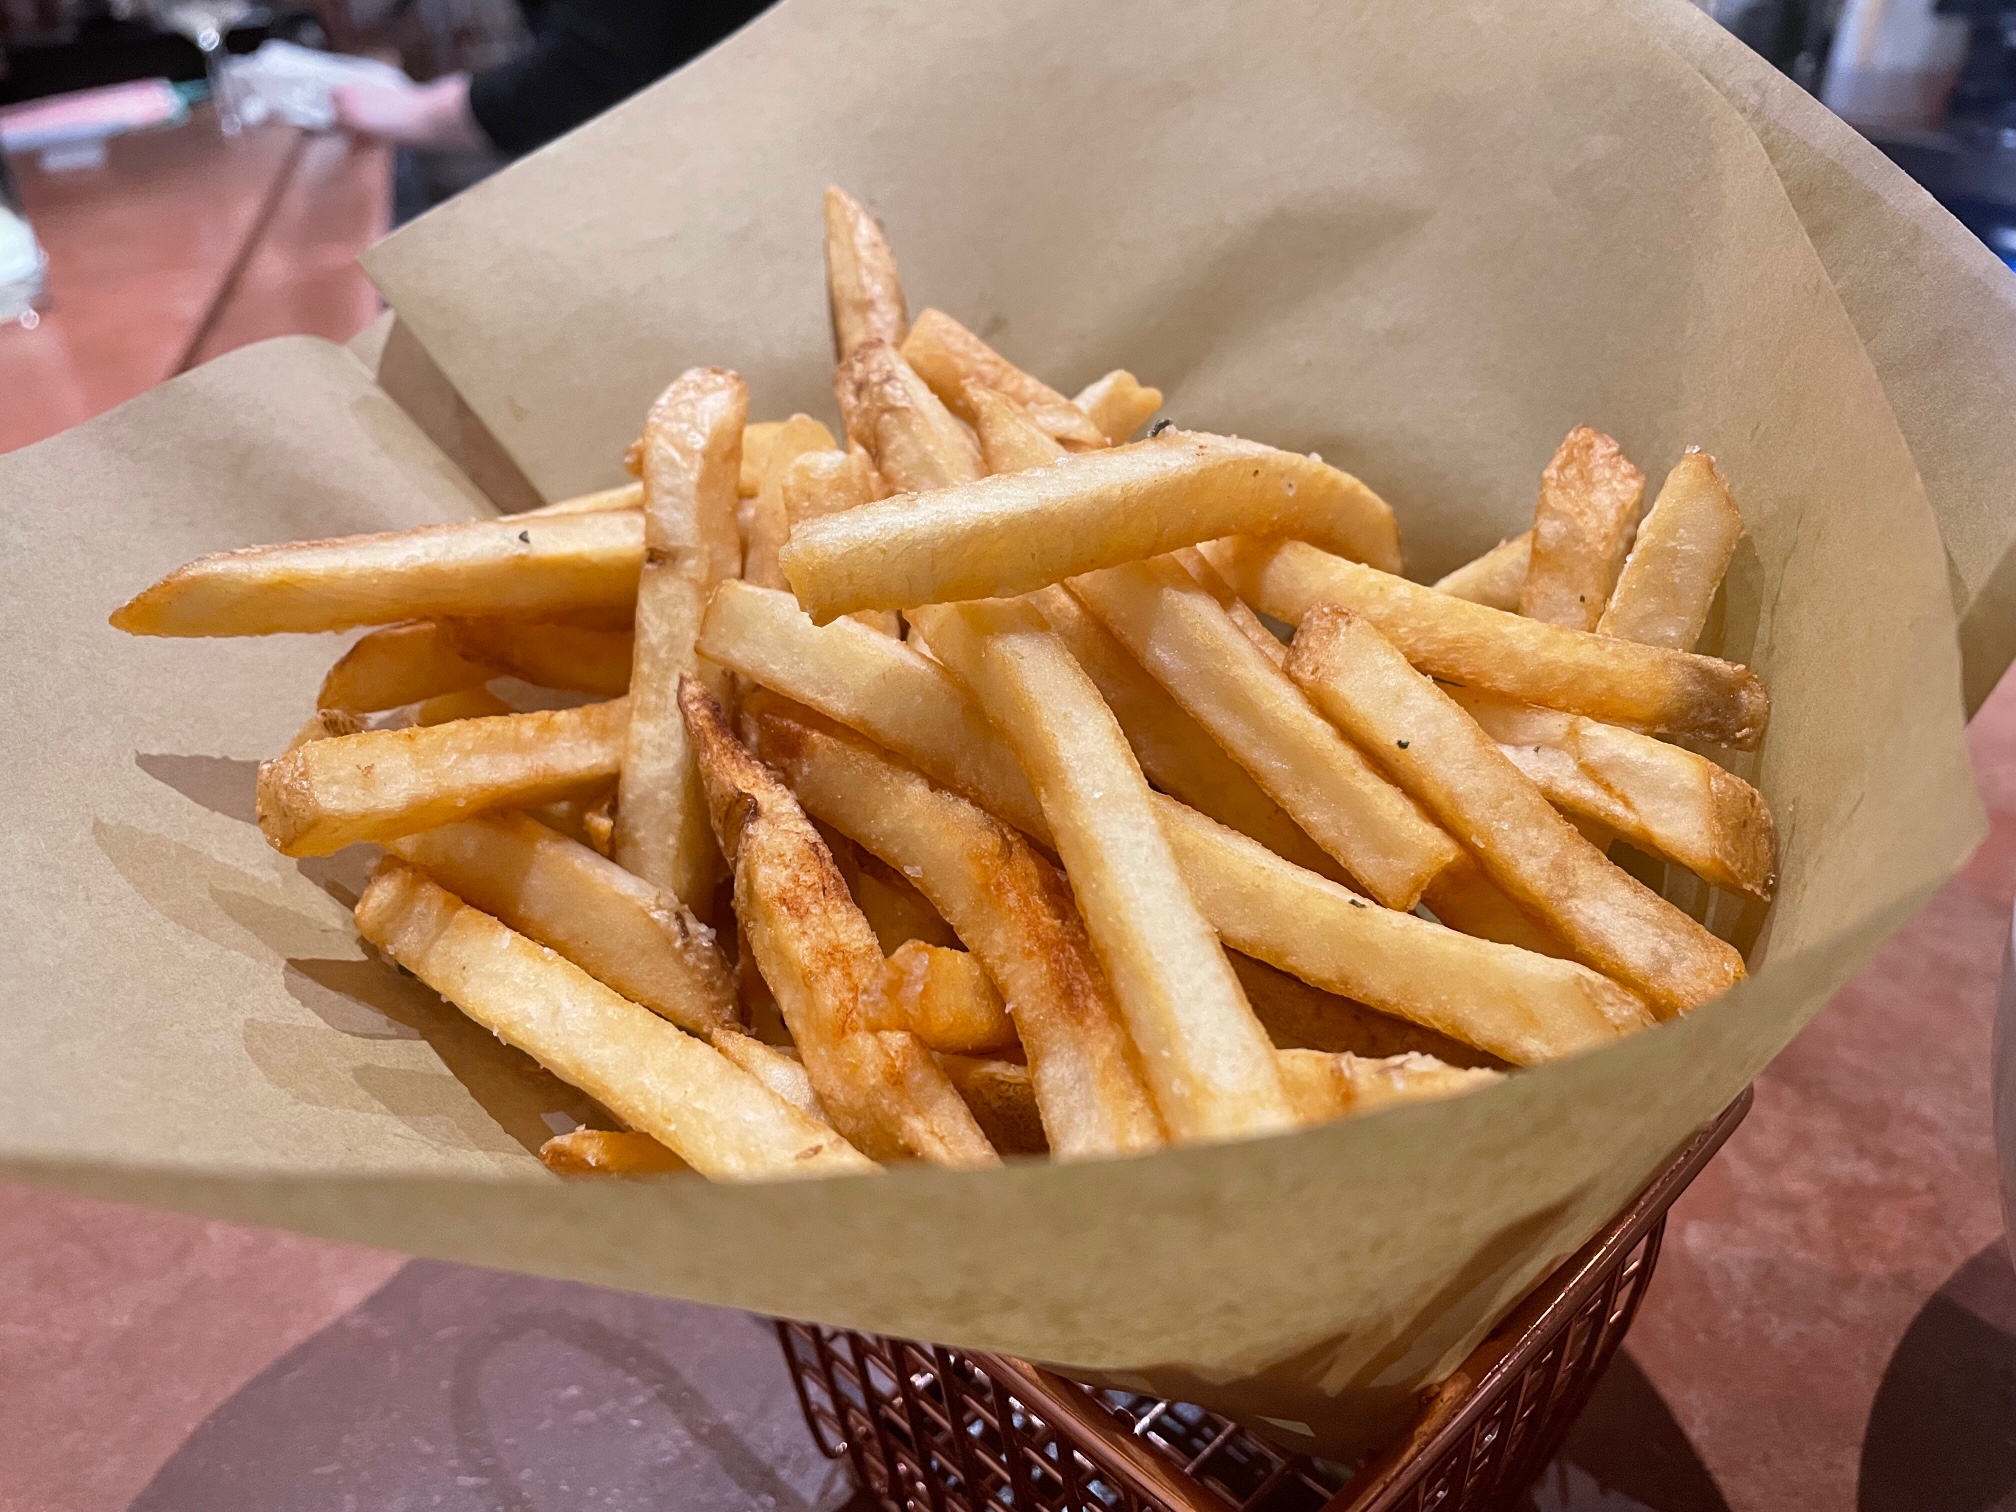 In a rose gold basket, there is a portion of fries on brown parchment paper. Photo by Alyssa Buckley.